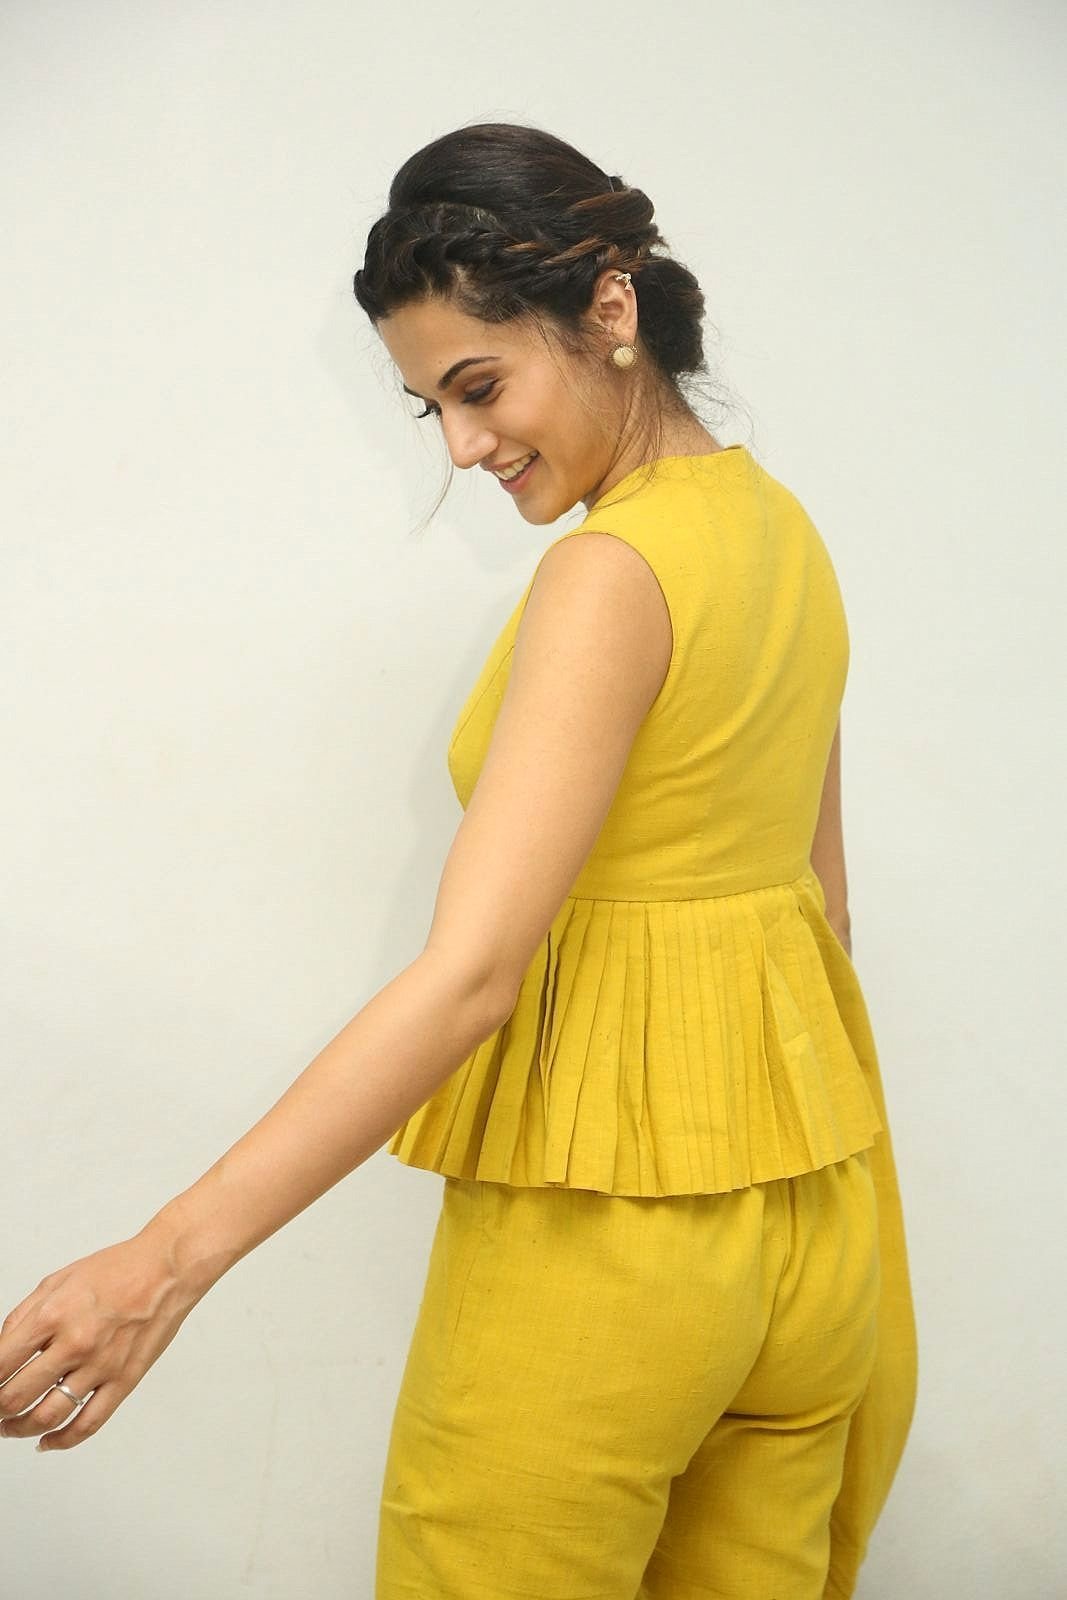 Taapsee Pannu at Anando Brahma Movie Motion Poster Launch Photos | Picture 1500603